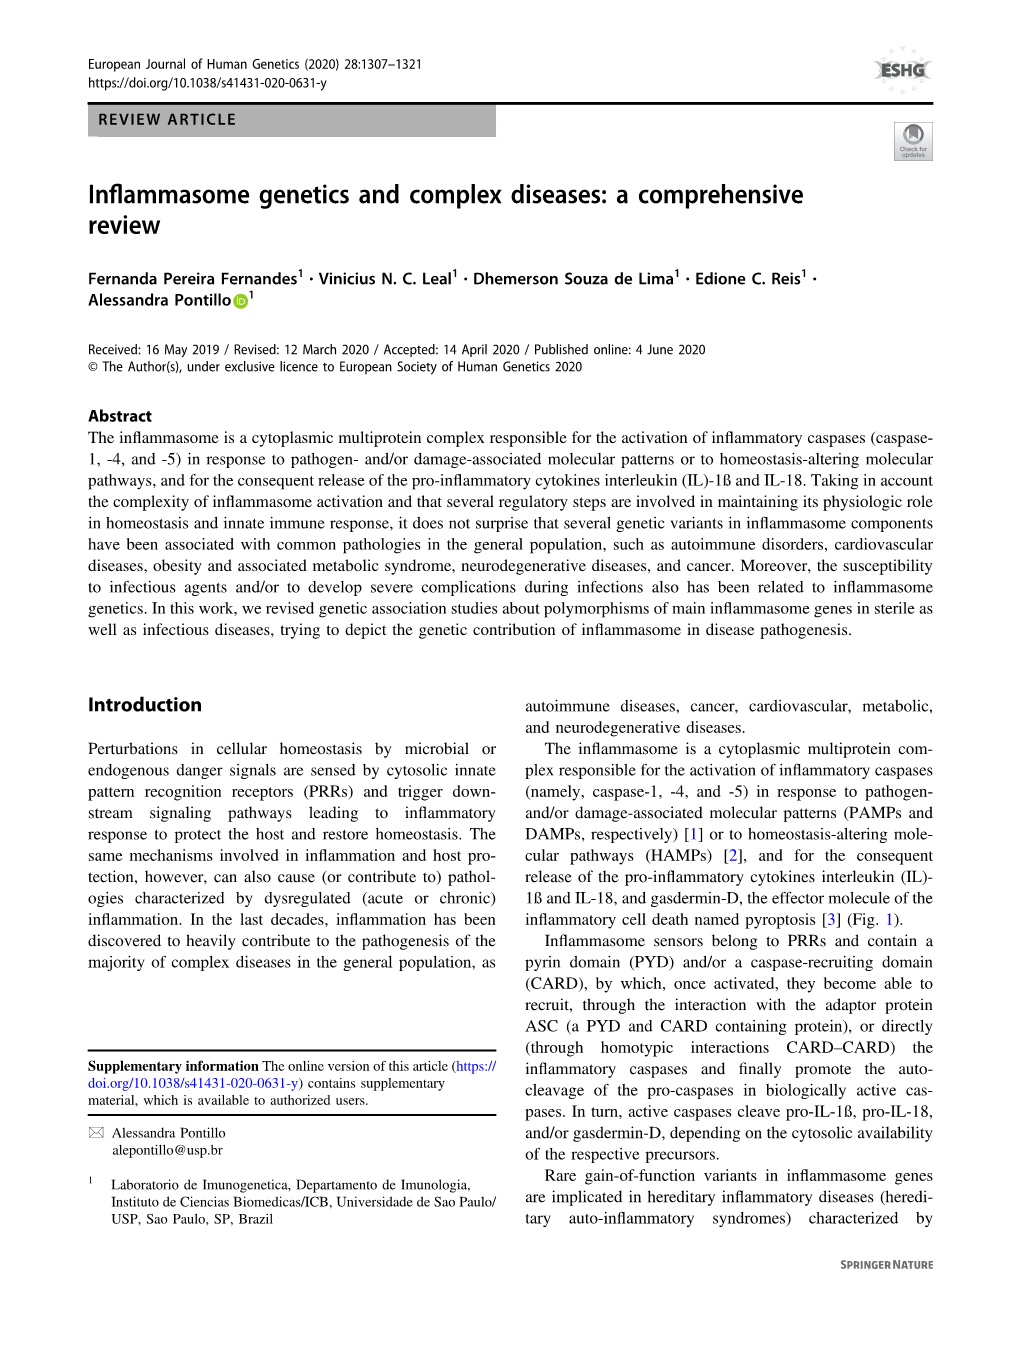 Inflammasome Genetics and Complex Diseases: a Comprehensive Review